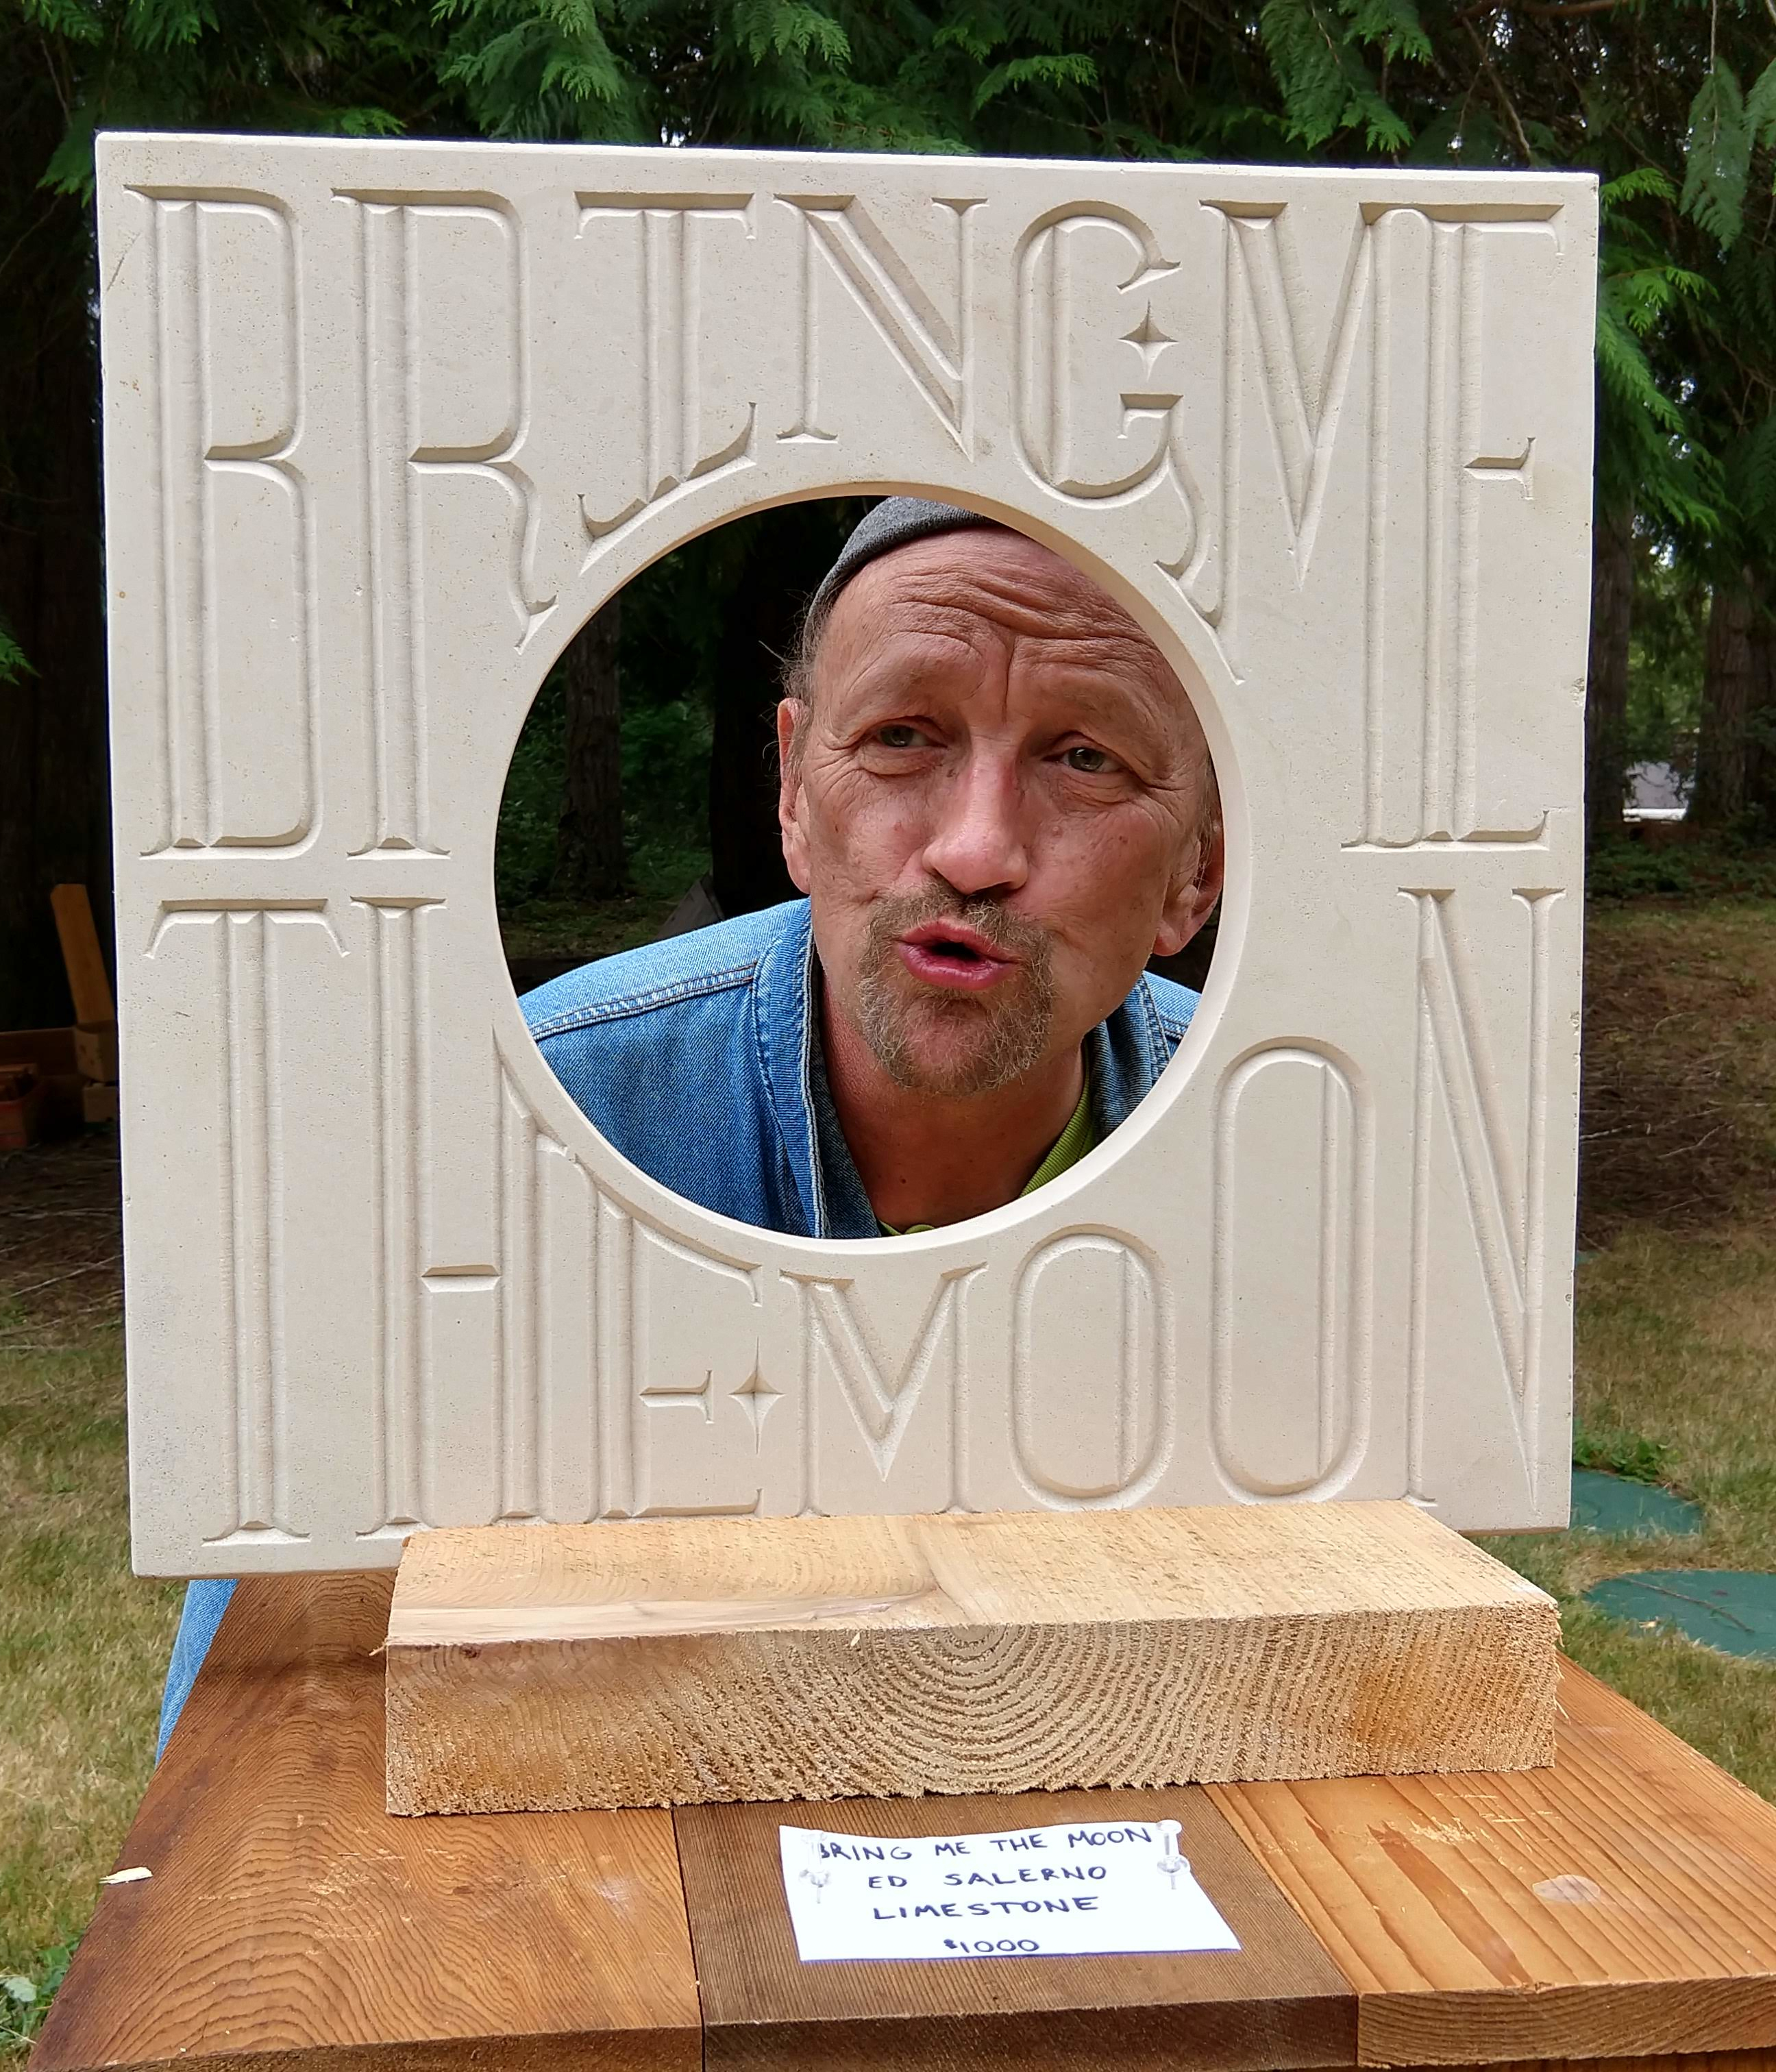 Tom Francis, Camp Pilgrim Firs 2021. Sculpture by Ed Salerno, Photo by Cyra Jane